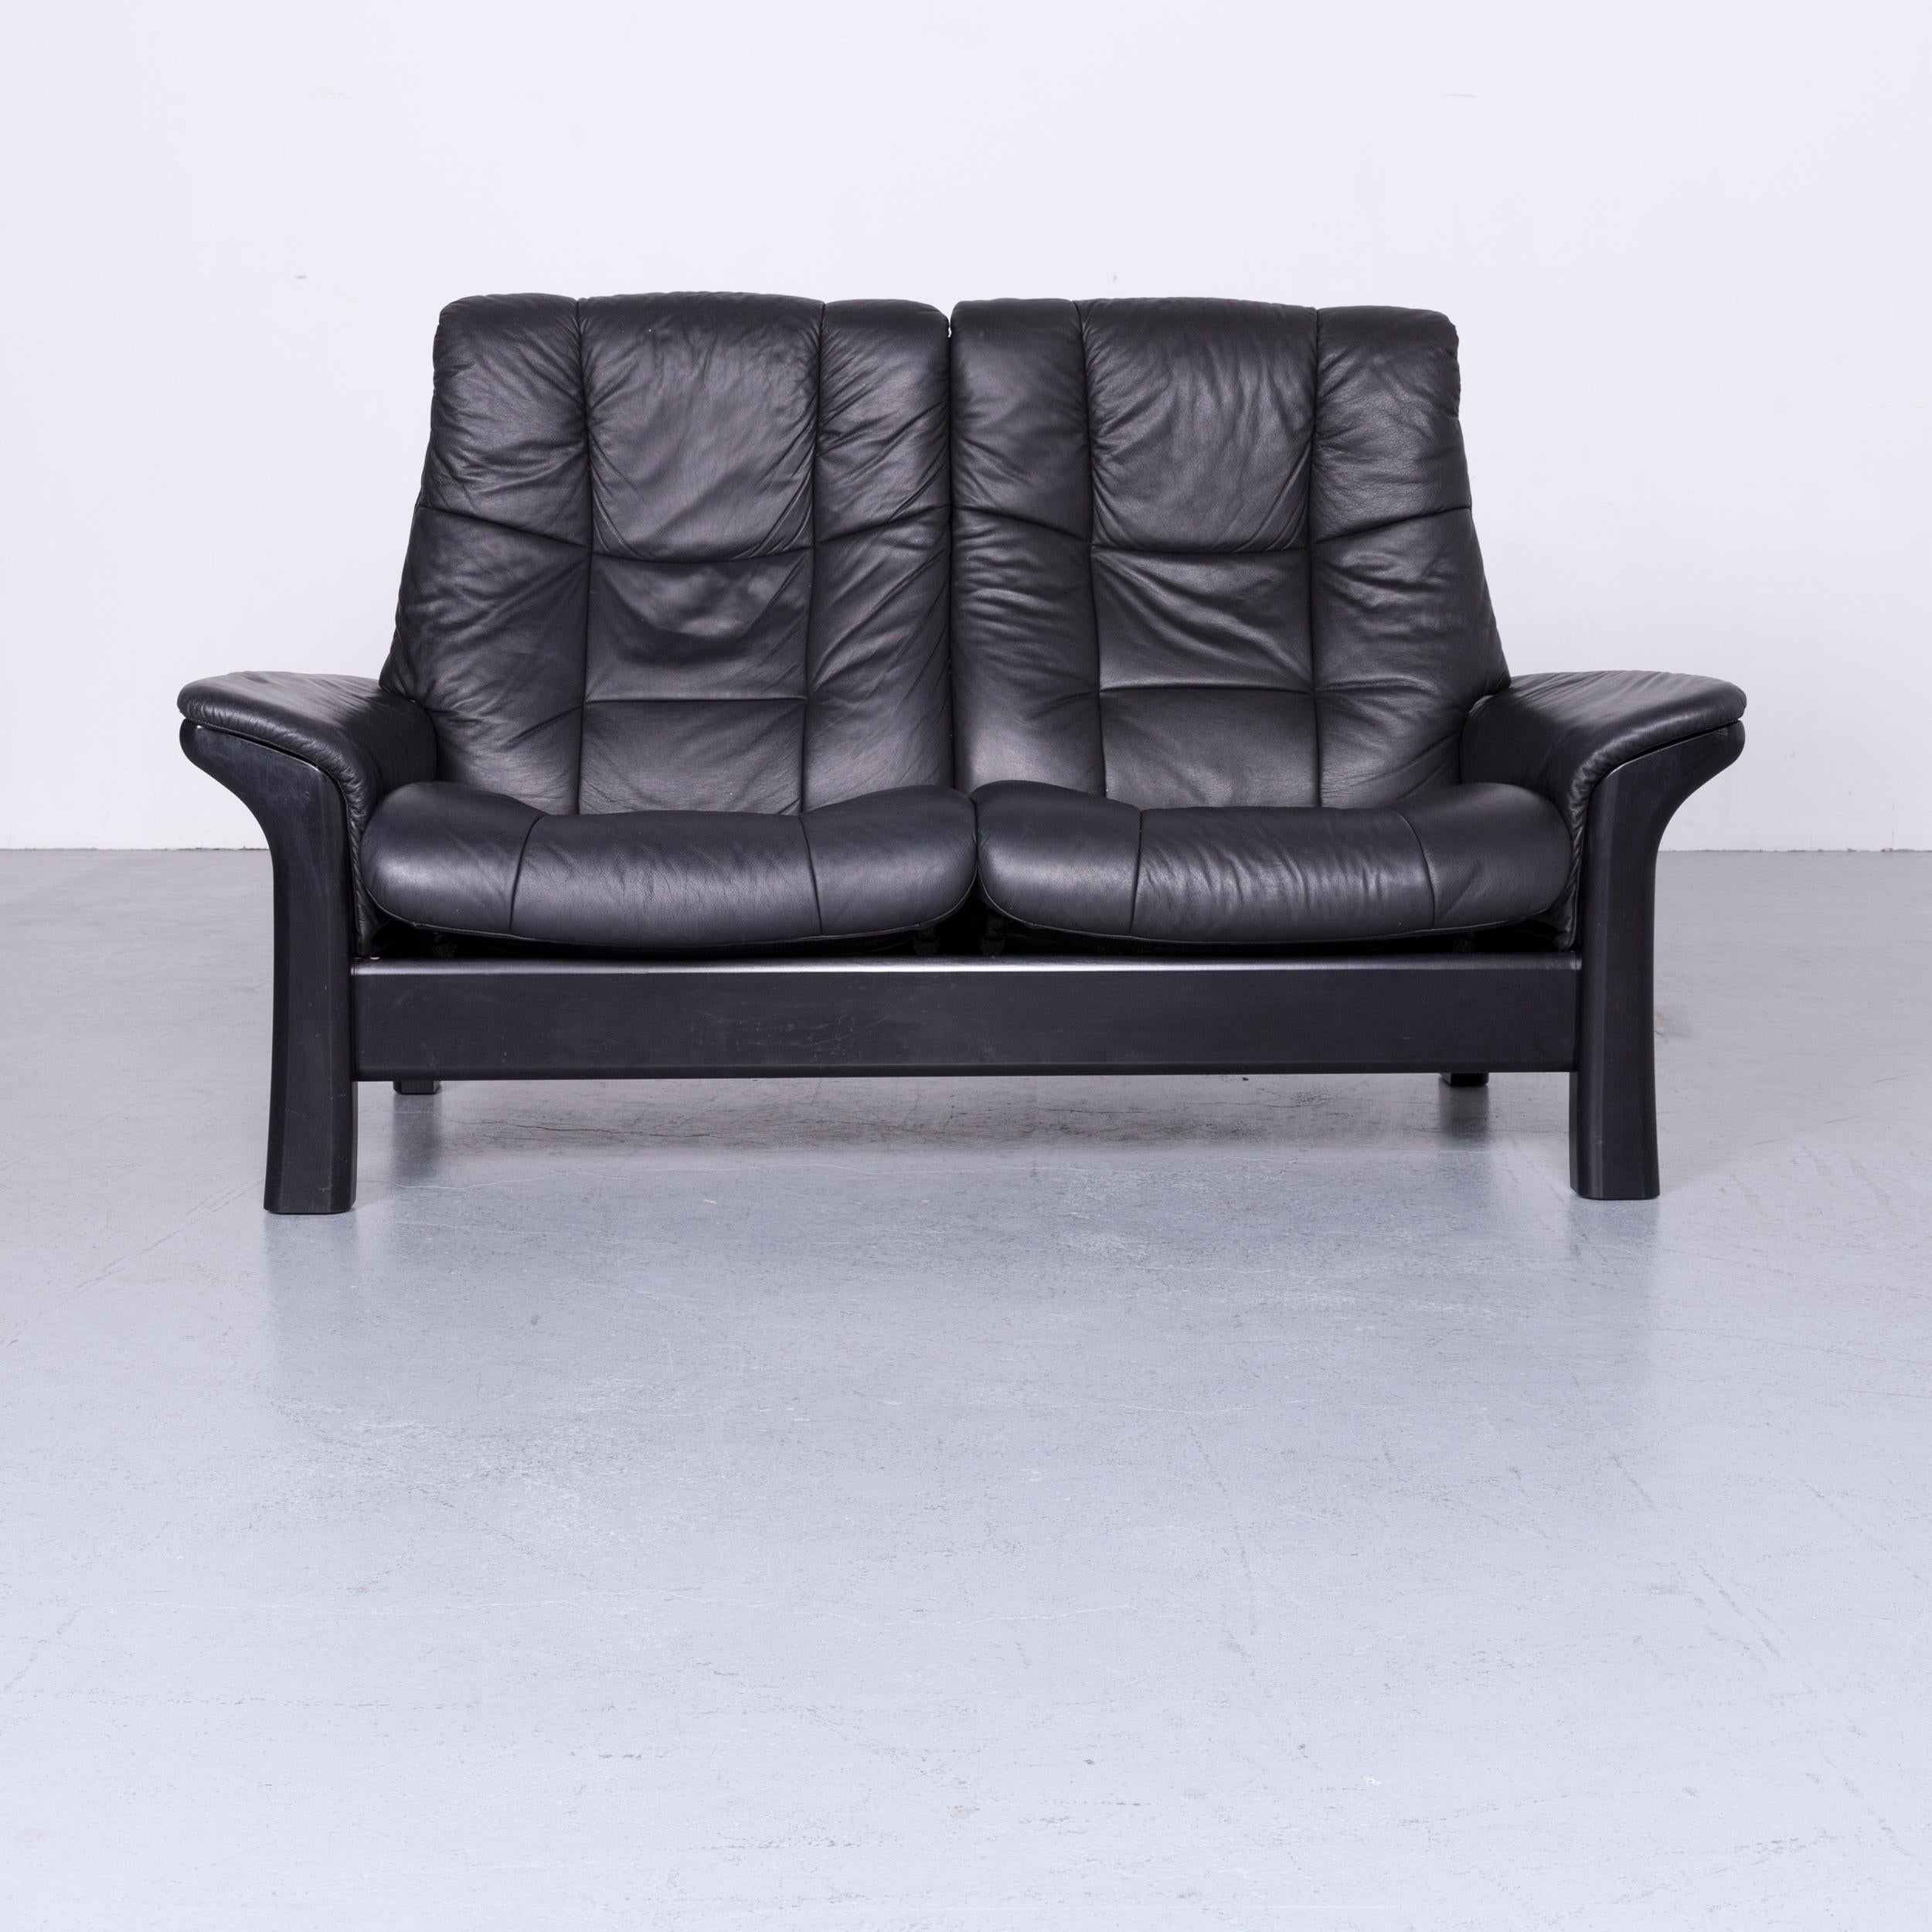 We bring to you an Stressless Buckingham two-seat sofa black leather couch with function.












